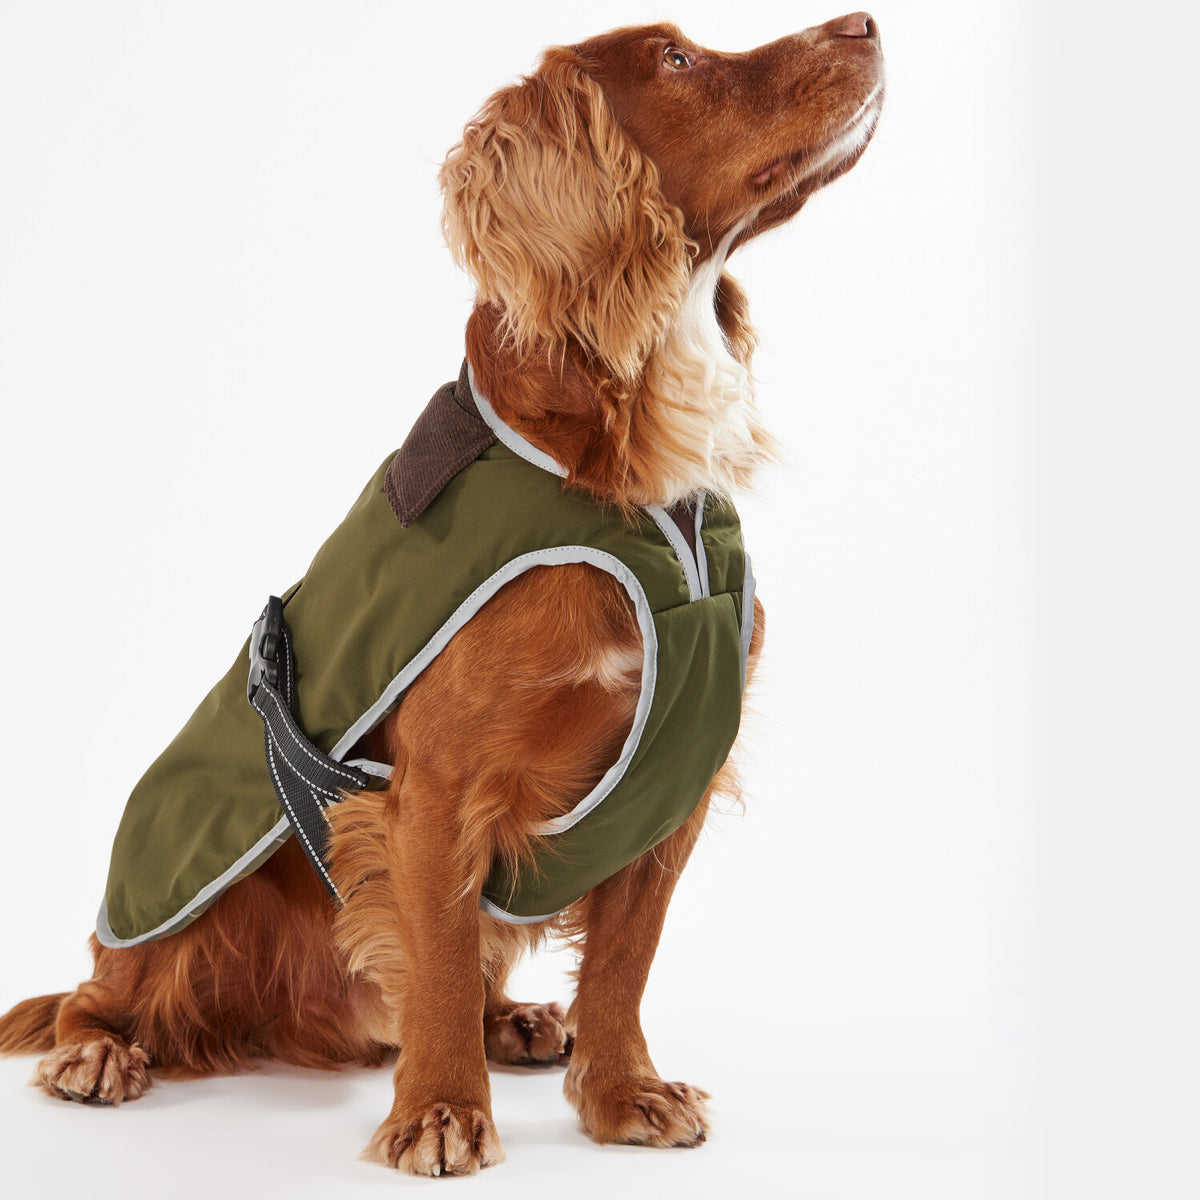 Barbour Monmouth Waterproof Dog Coat | Olive